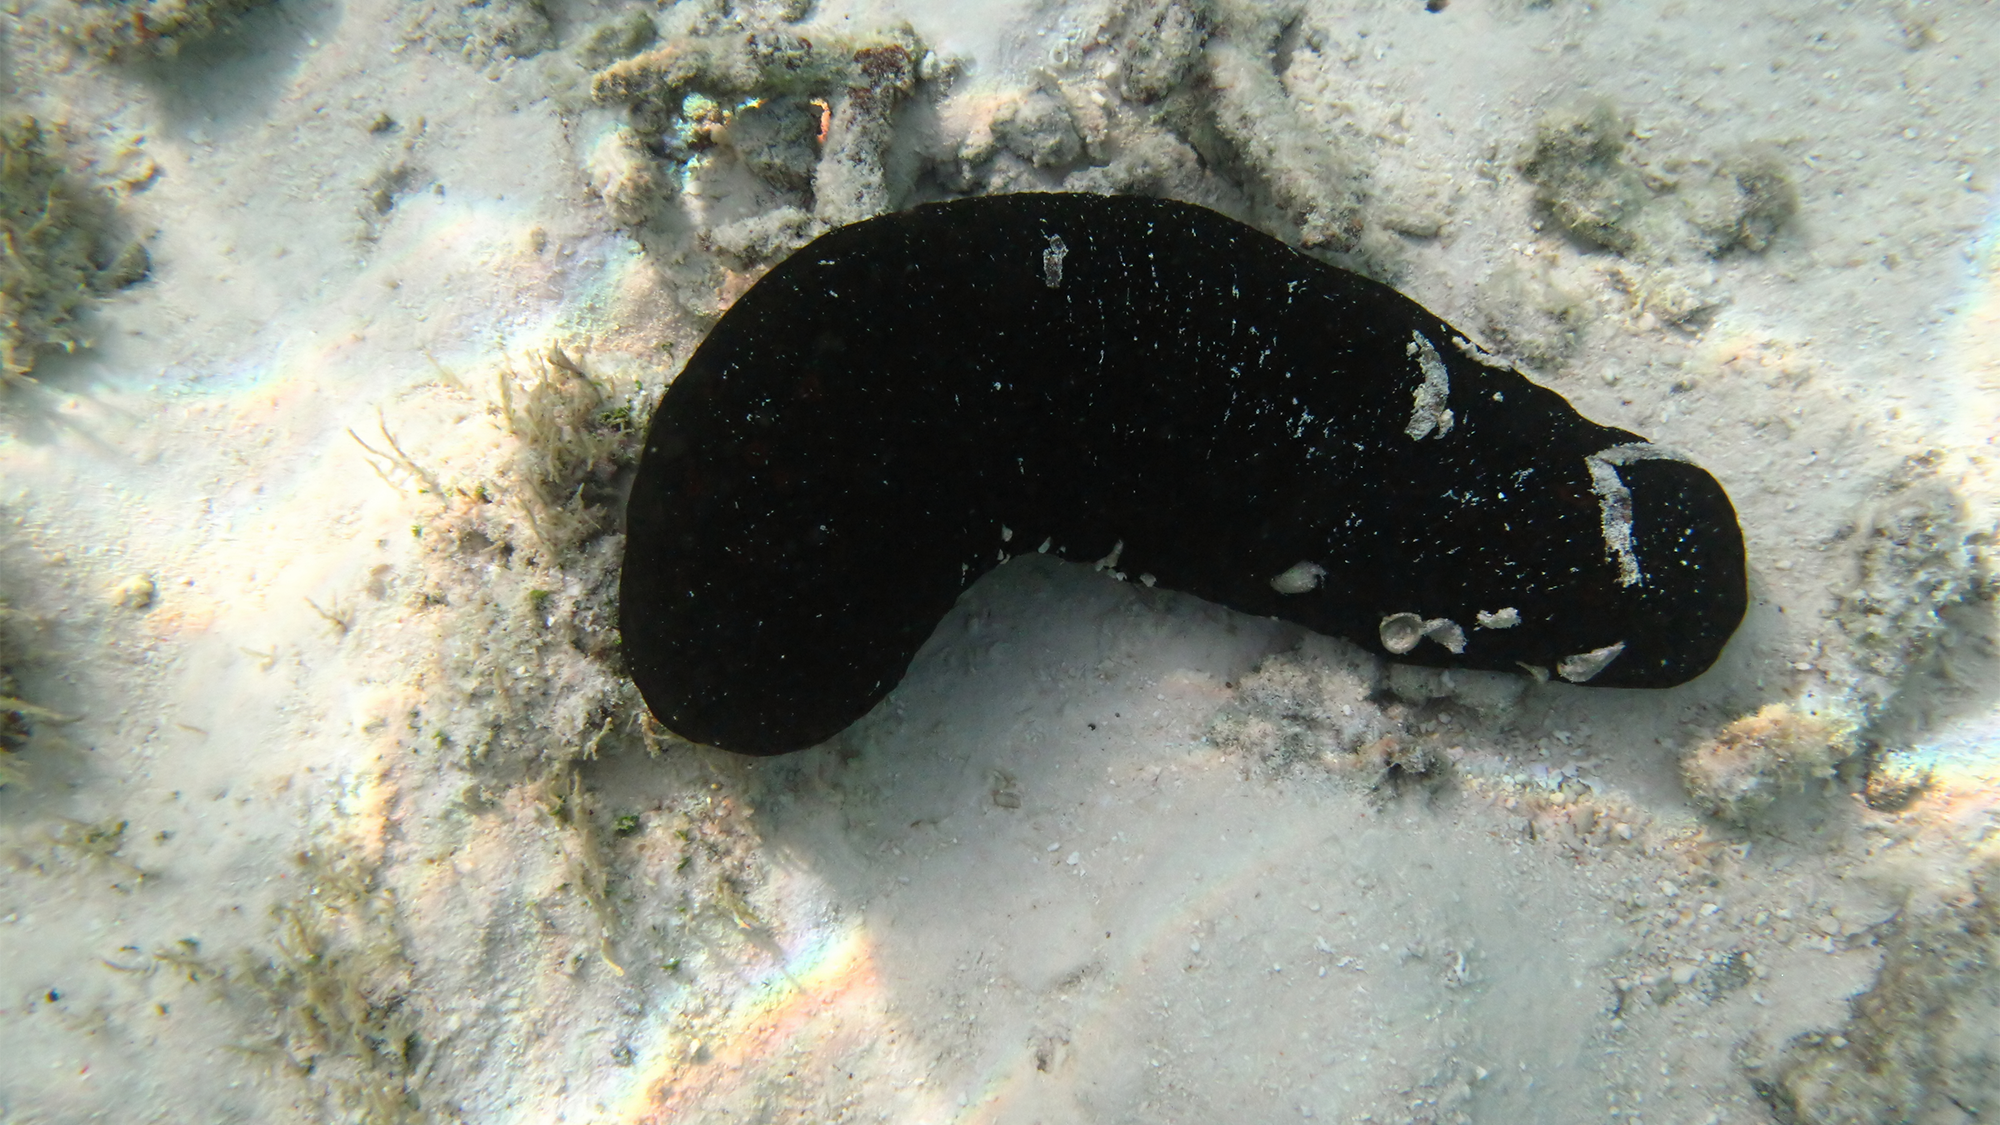 A black sea cucumber on the floor of the Indian Ocean.